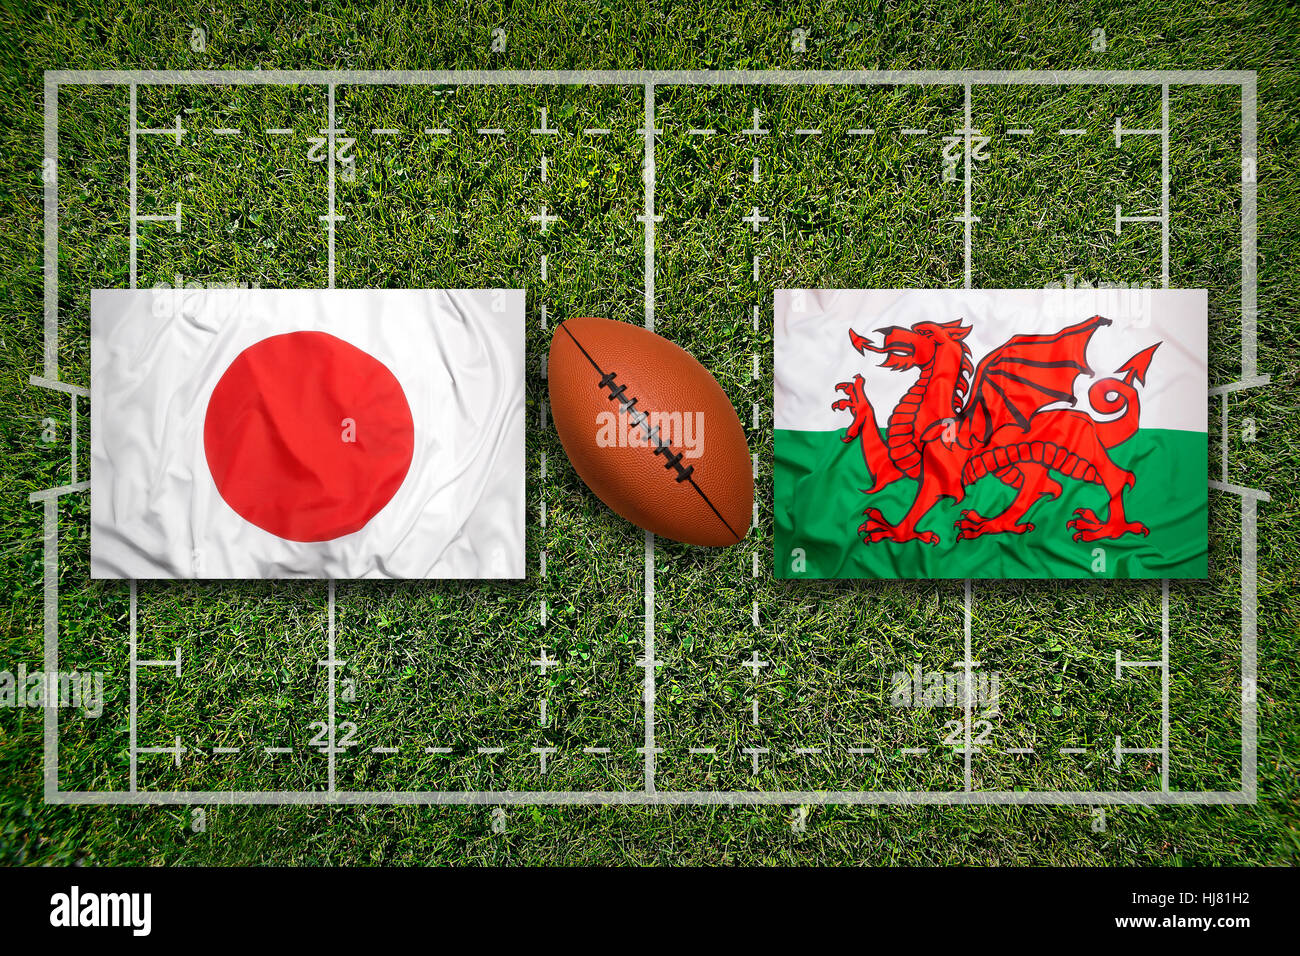 Japan vs. Wales flags on green rugby field Stock Photo